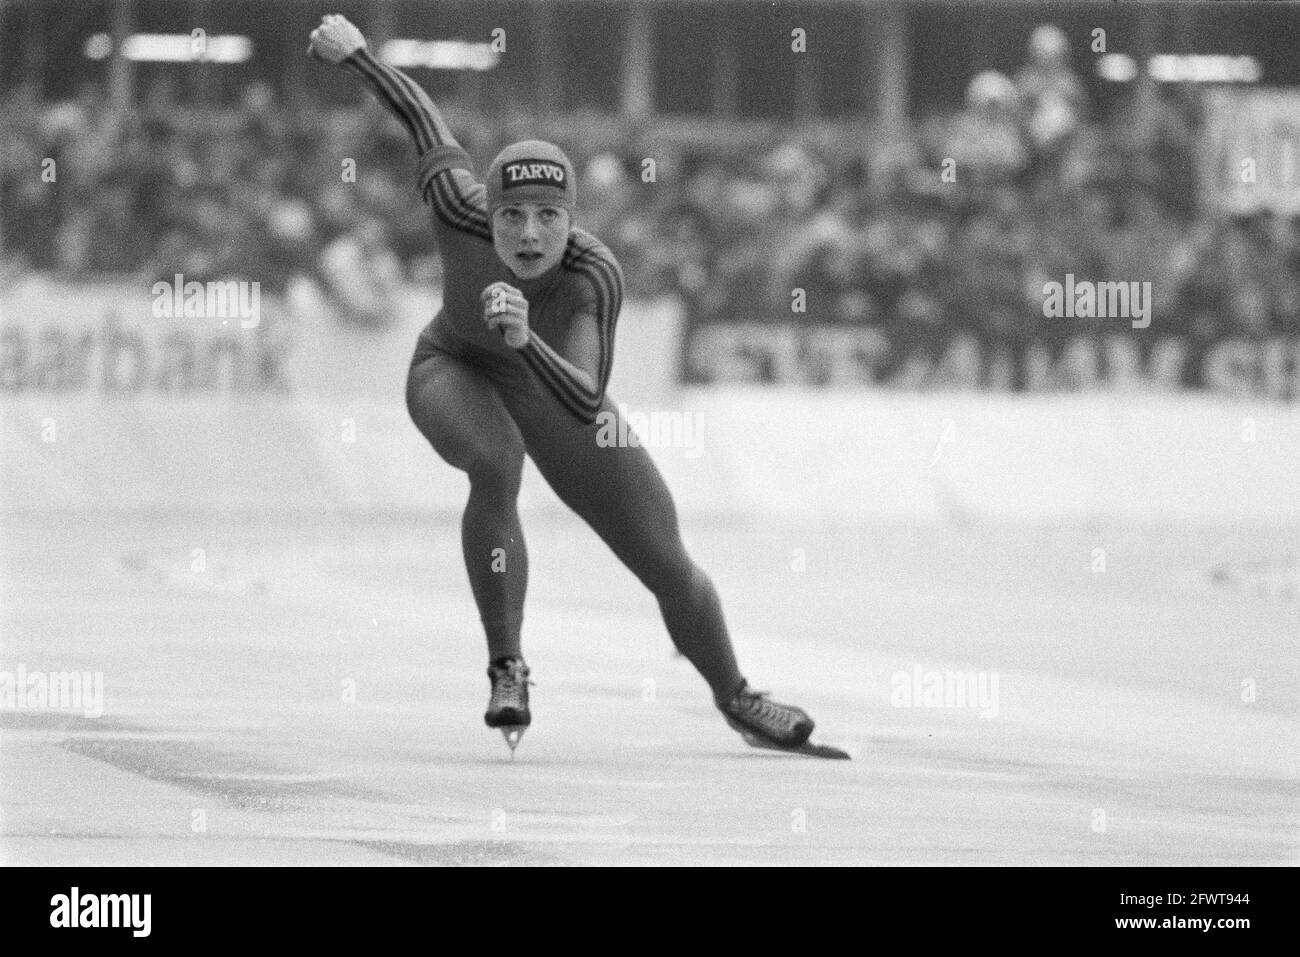 National Championship speed skating in Groningen; Ria Visser in action, December 29, 1983, SCHATSEN, sport, The Netherlands, 20th century press agency photo, news to remember, documentary, historic photography 1945-1990, visual stories, human history of the Twentieth Century, capturing moments in time Stock Photo